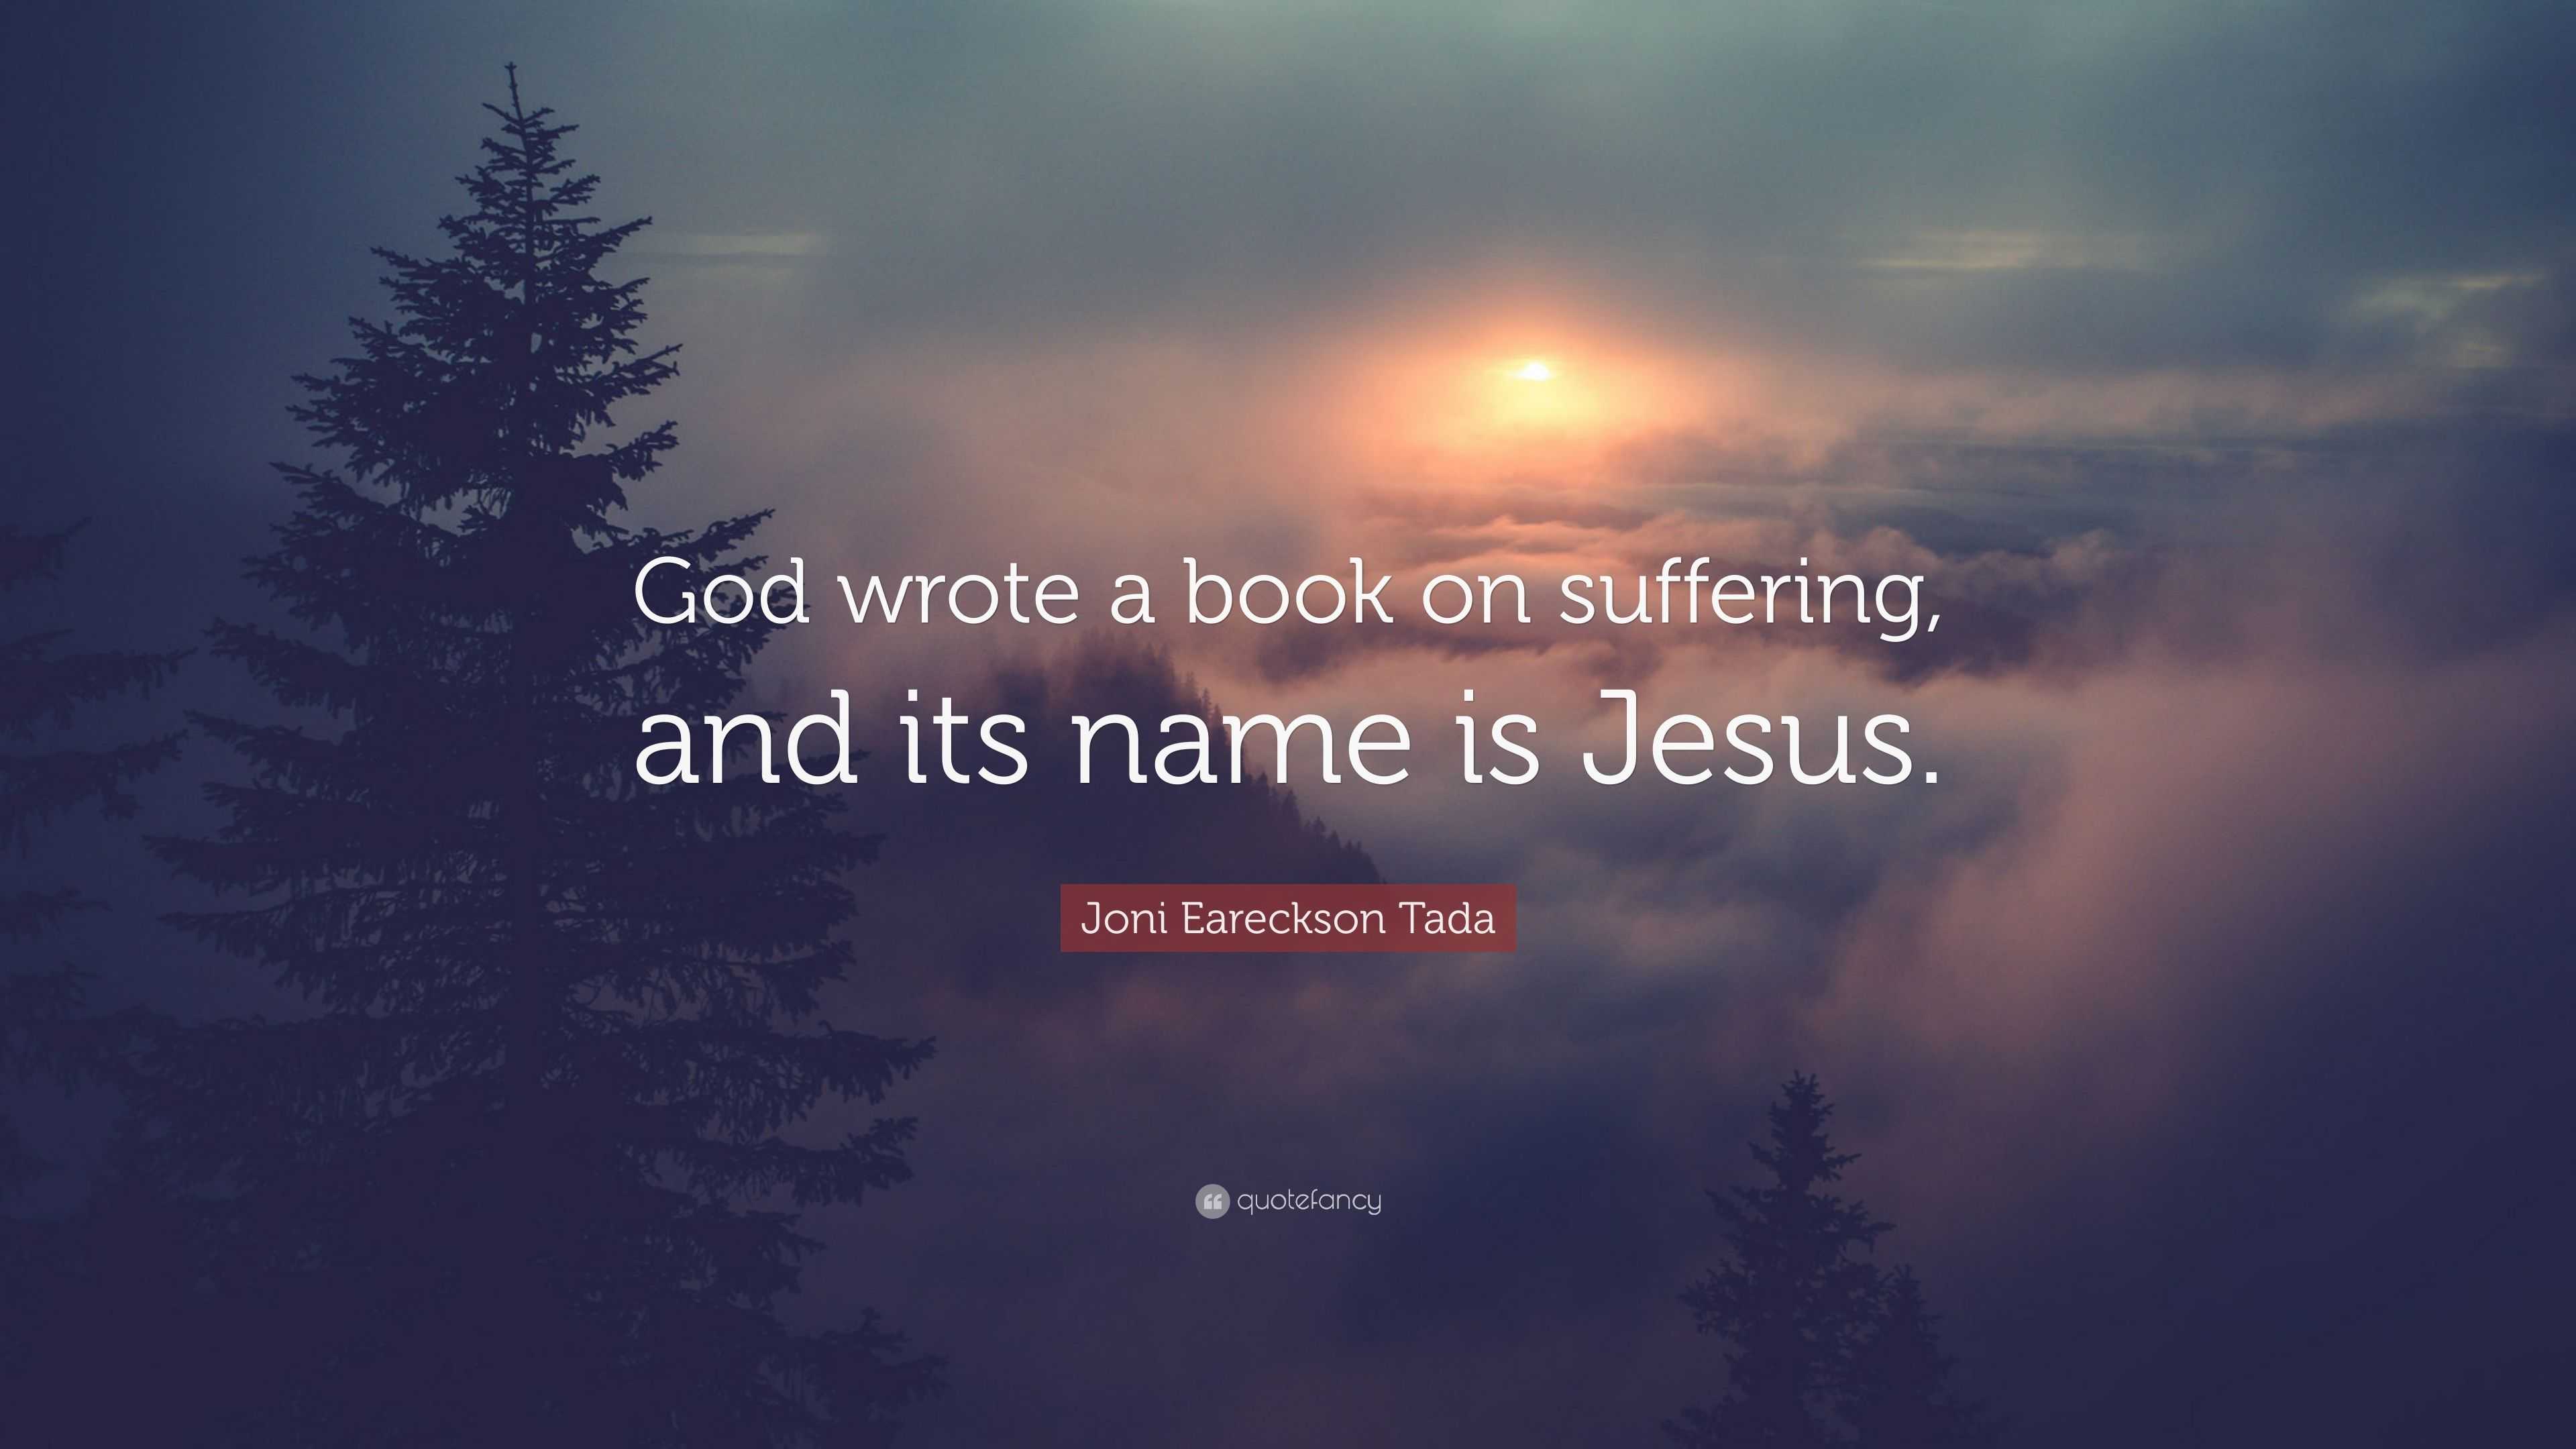 Joni Eareckson Tada Quote: “God wrote a book on suffering, and its name ...